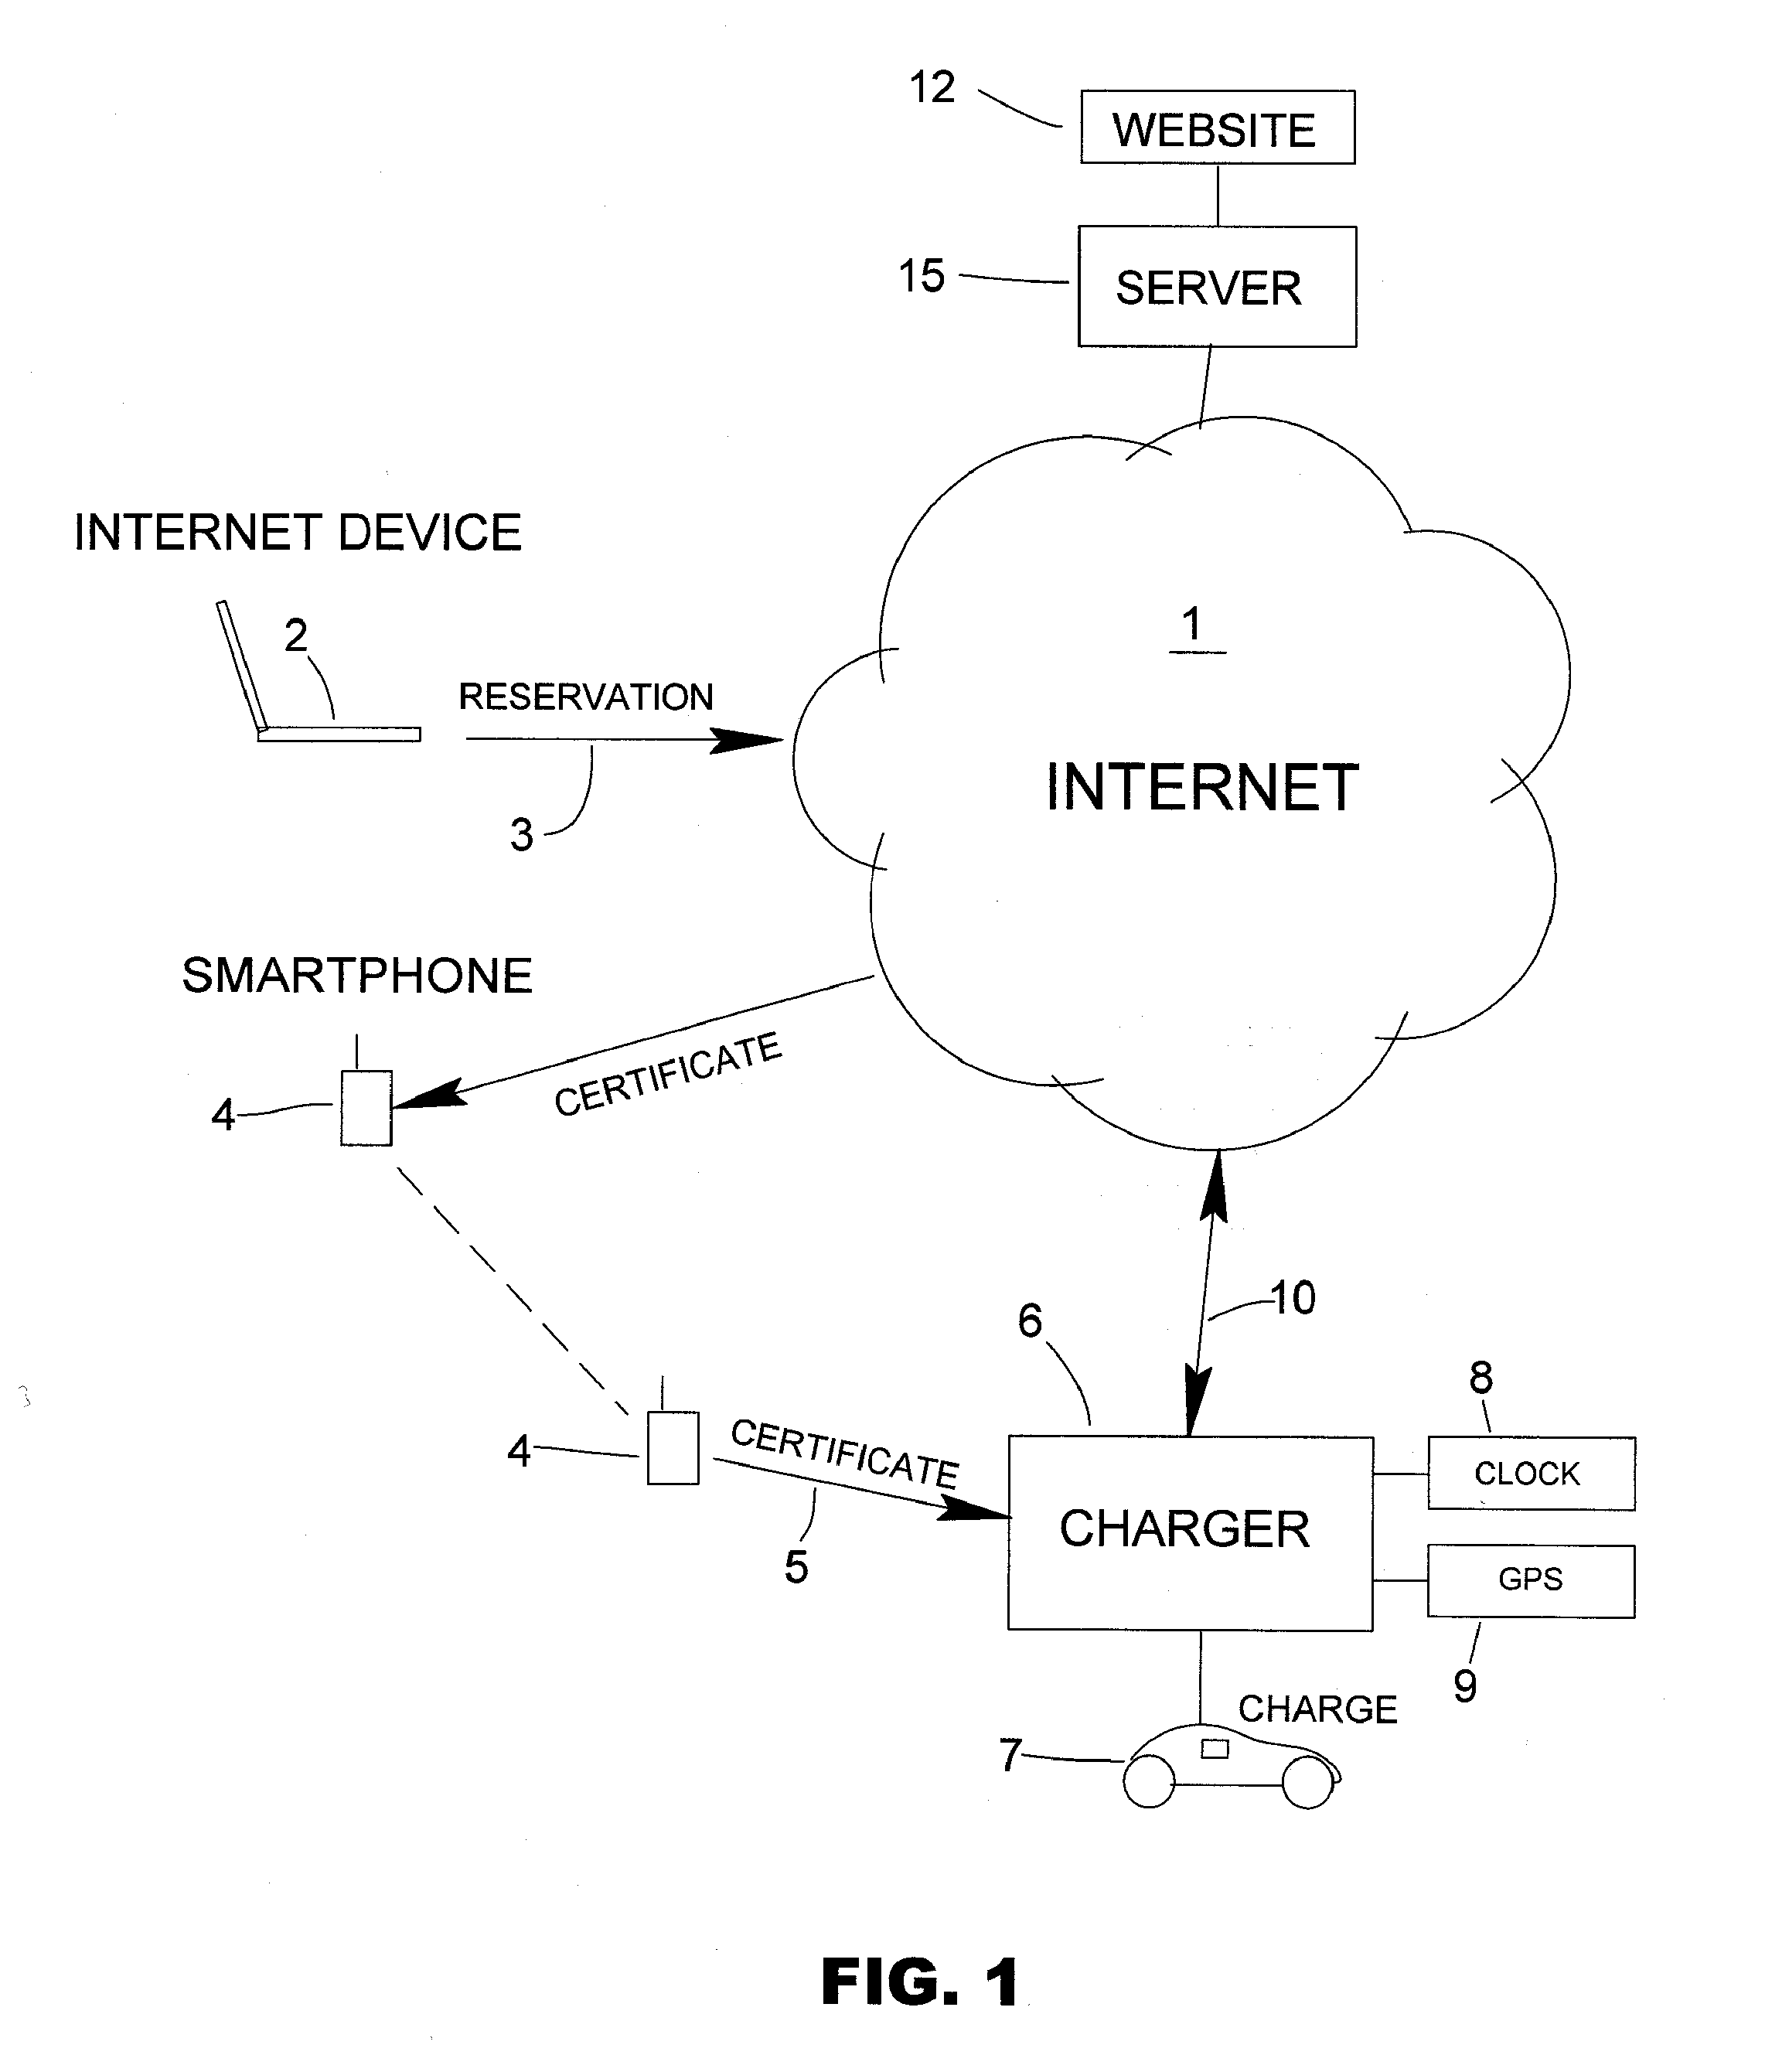 Method and System for Using a Mobile Device for Secure Access to Electric Vehicle Supply Equipment